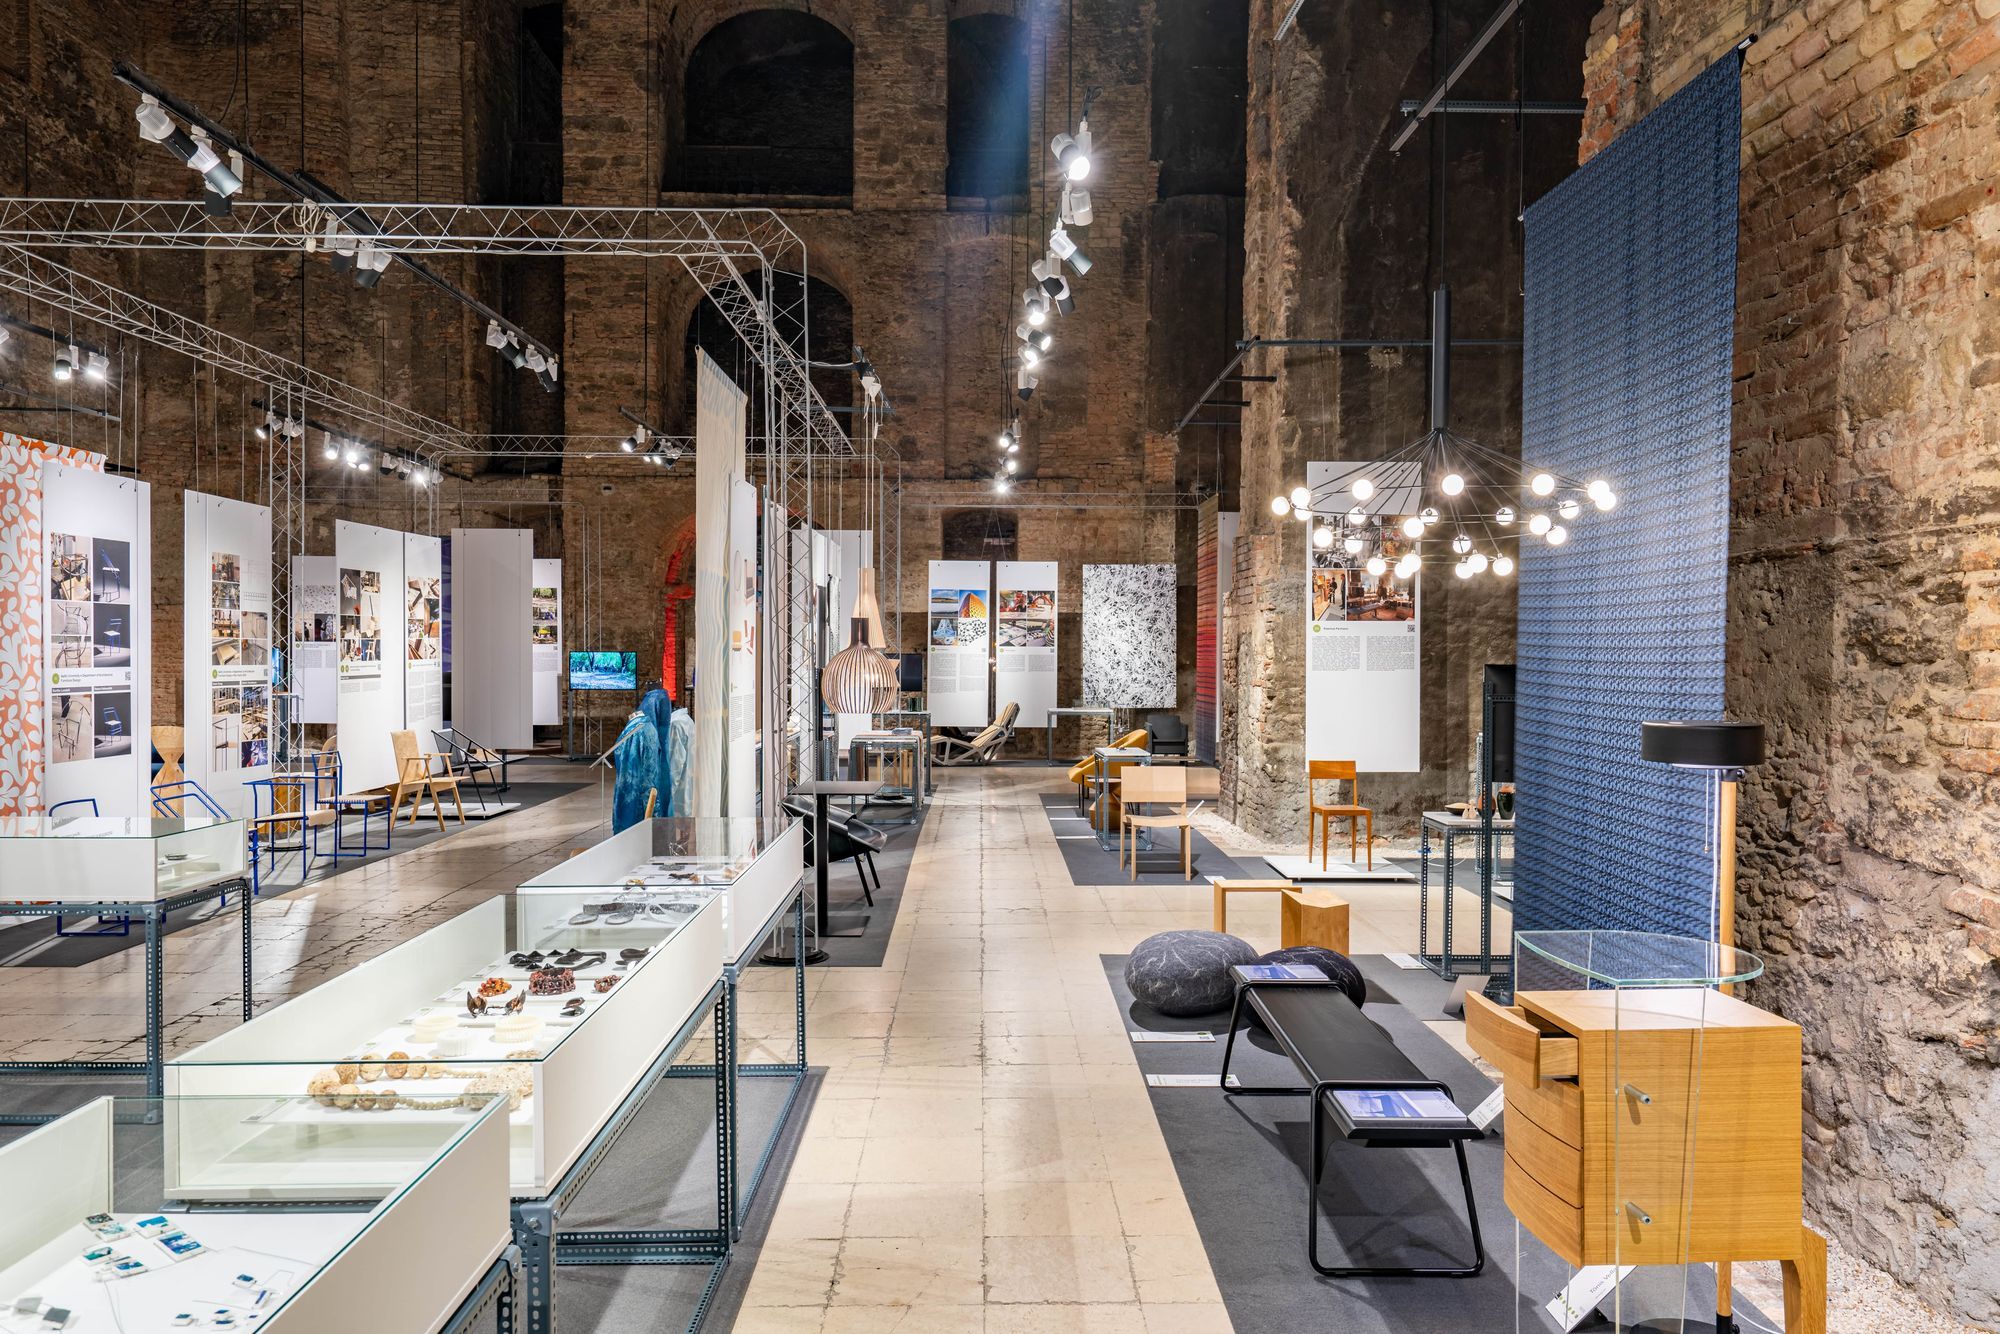 The Design Without Borders exhibition is open until the end of the week